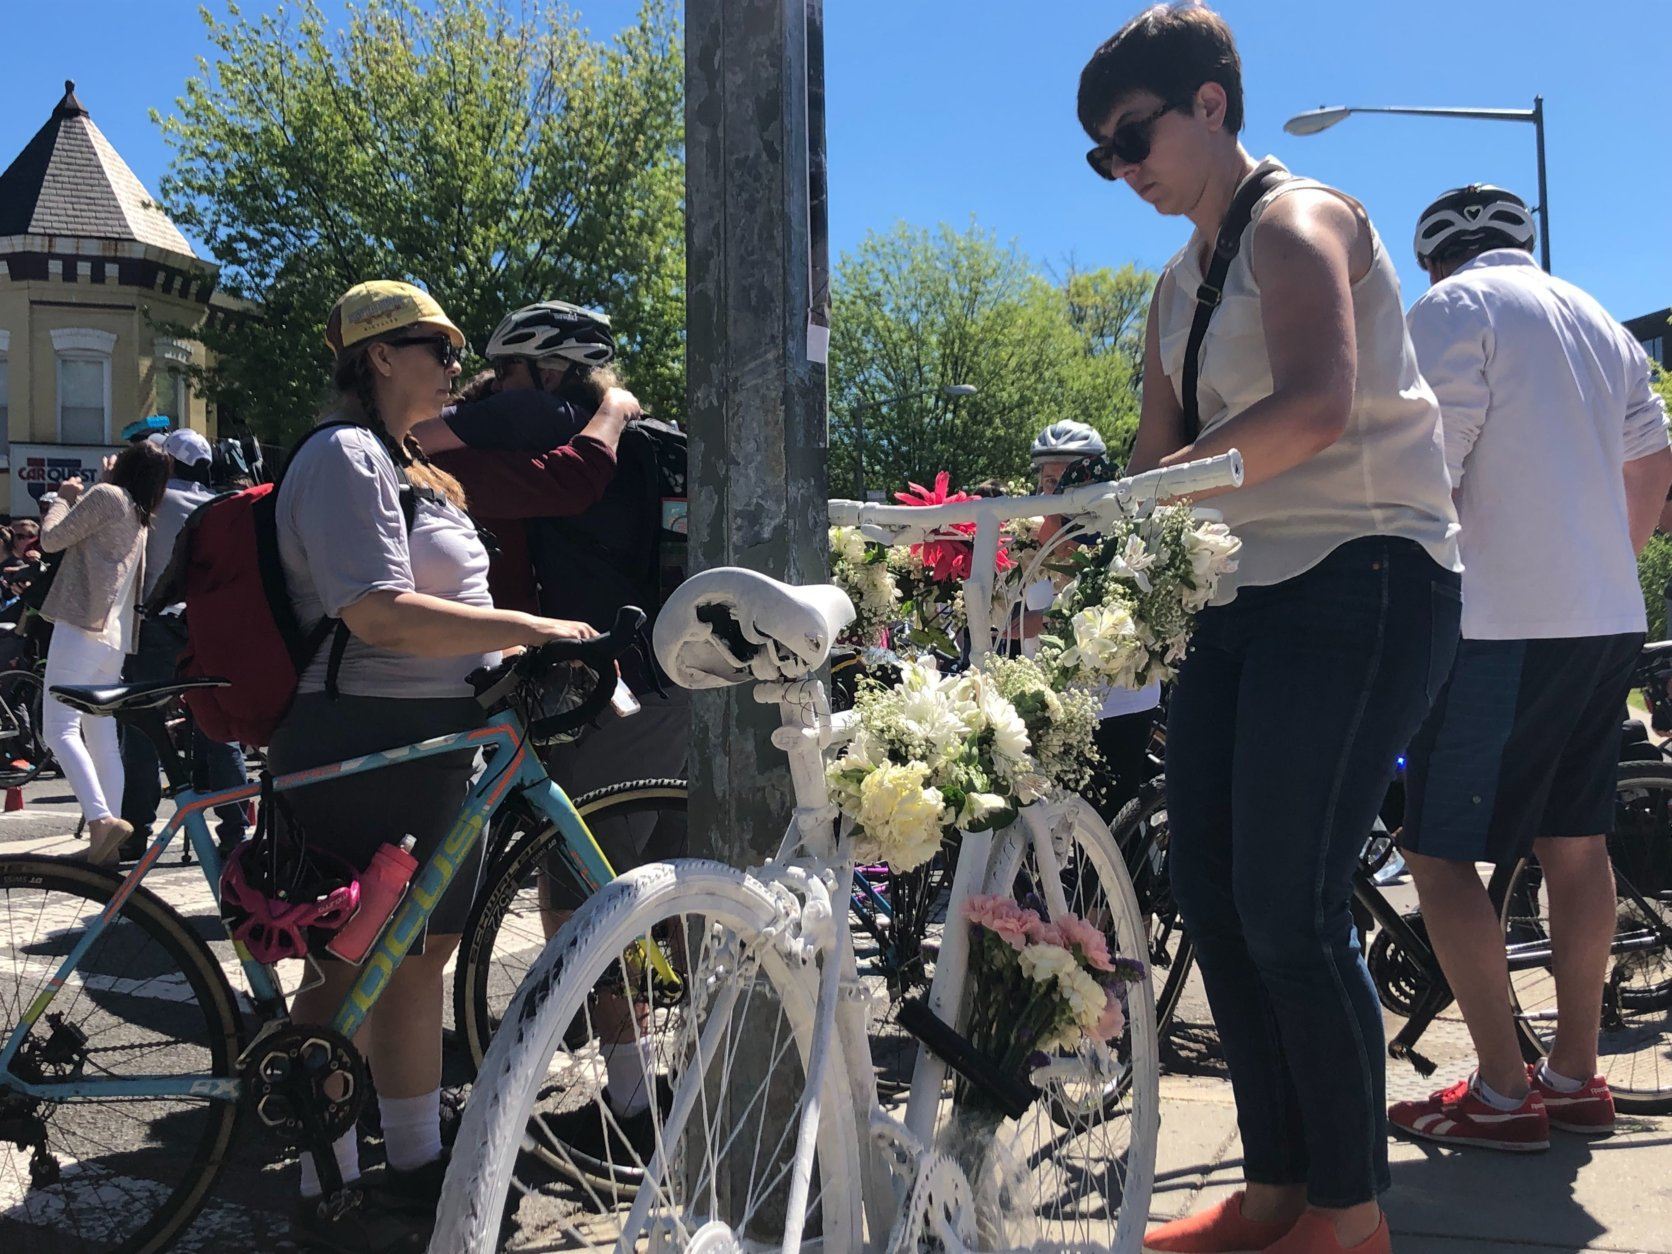 Mourners leave a ghost bike in memory of David Salovesh, who died on Florida Avenue in Northeast D.C. (WTOP/Melissa Howell)